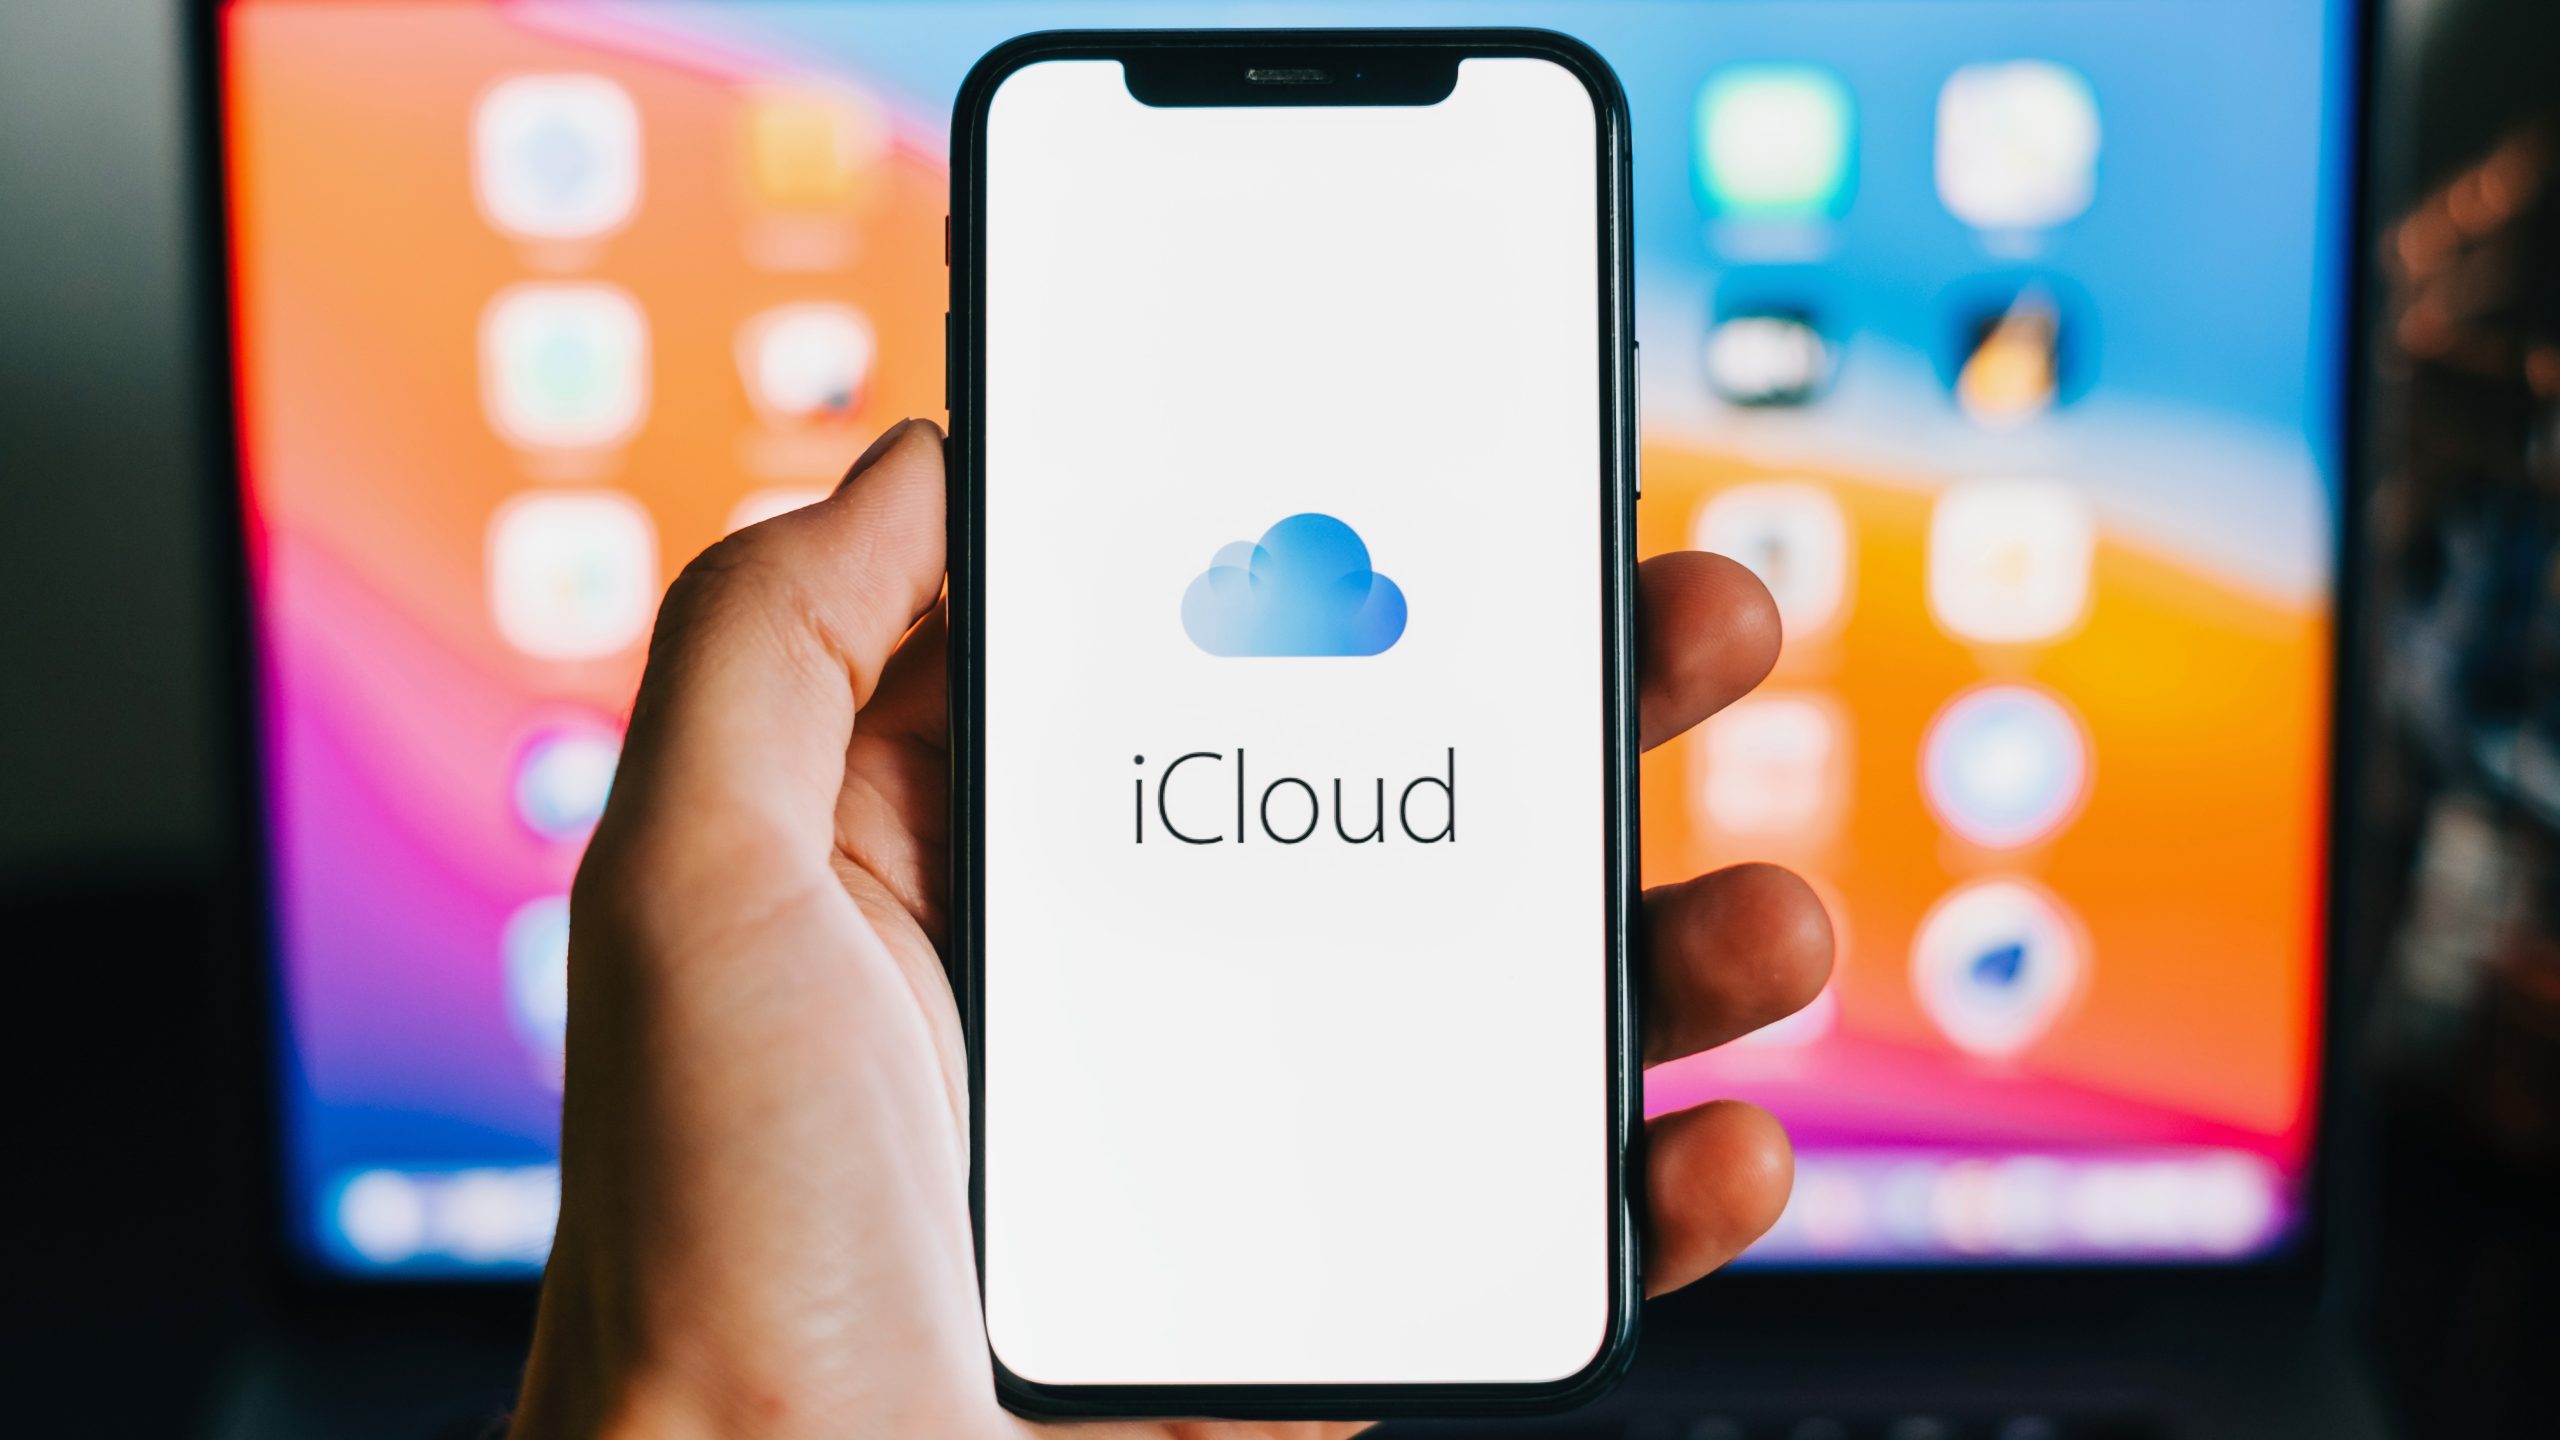 Easy troubleshoot guide for photos not syncing to iCloud